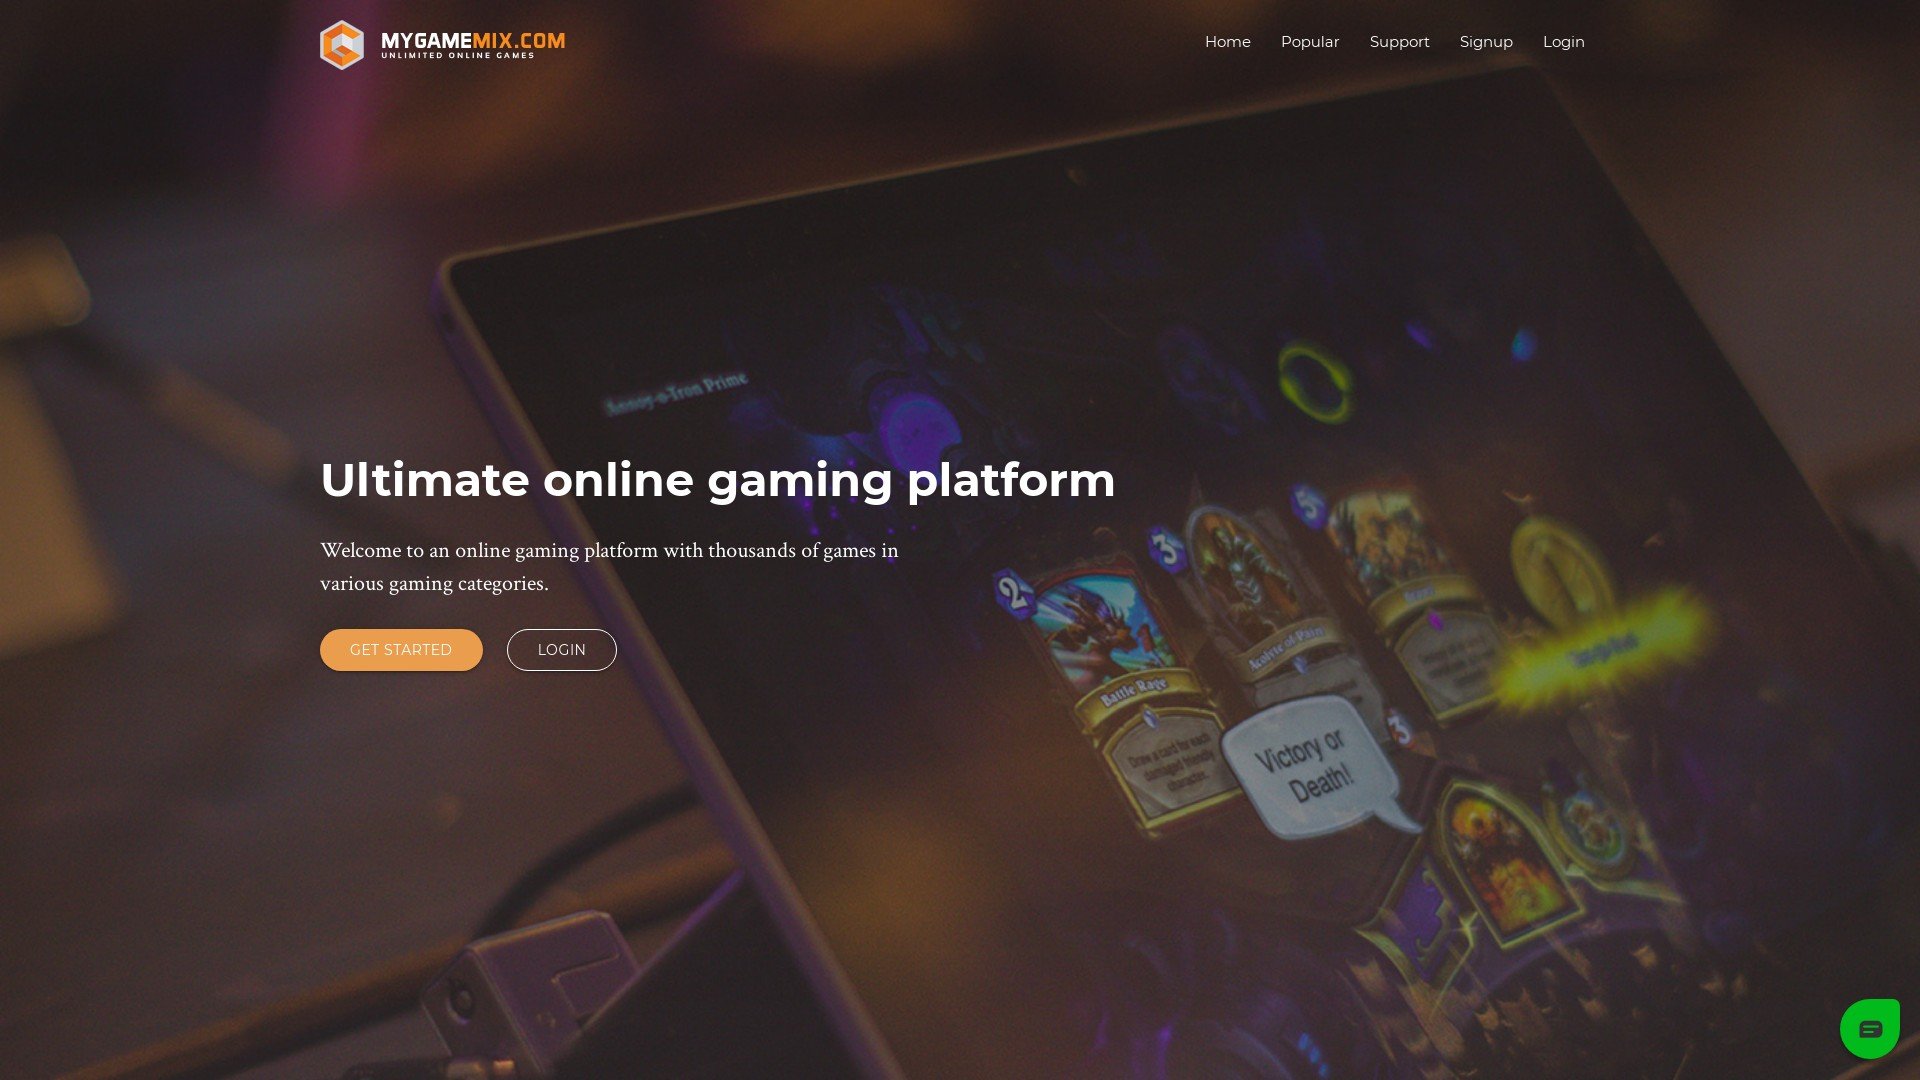 Is Mygamemix a Scam? Review of the Online Gaming Platform